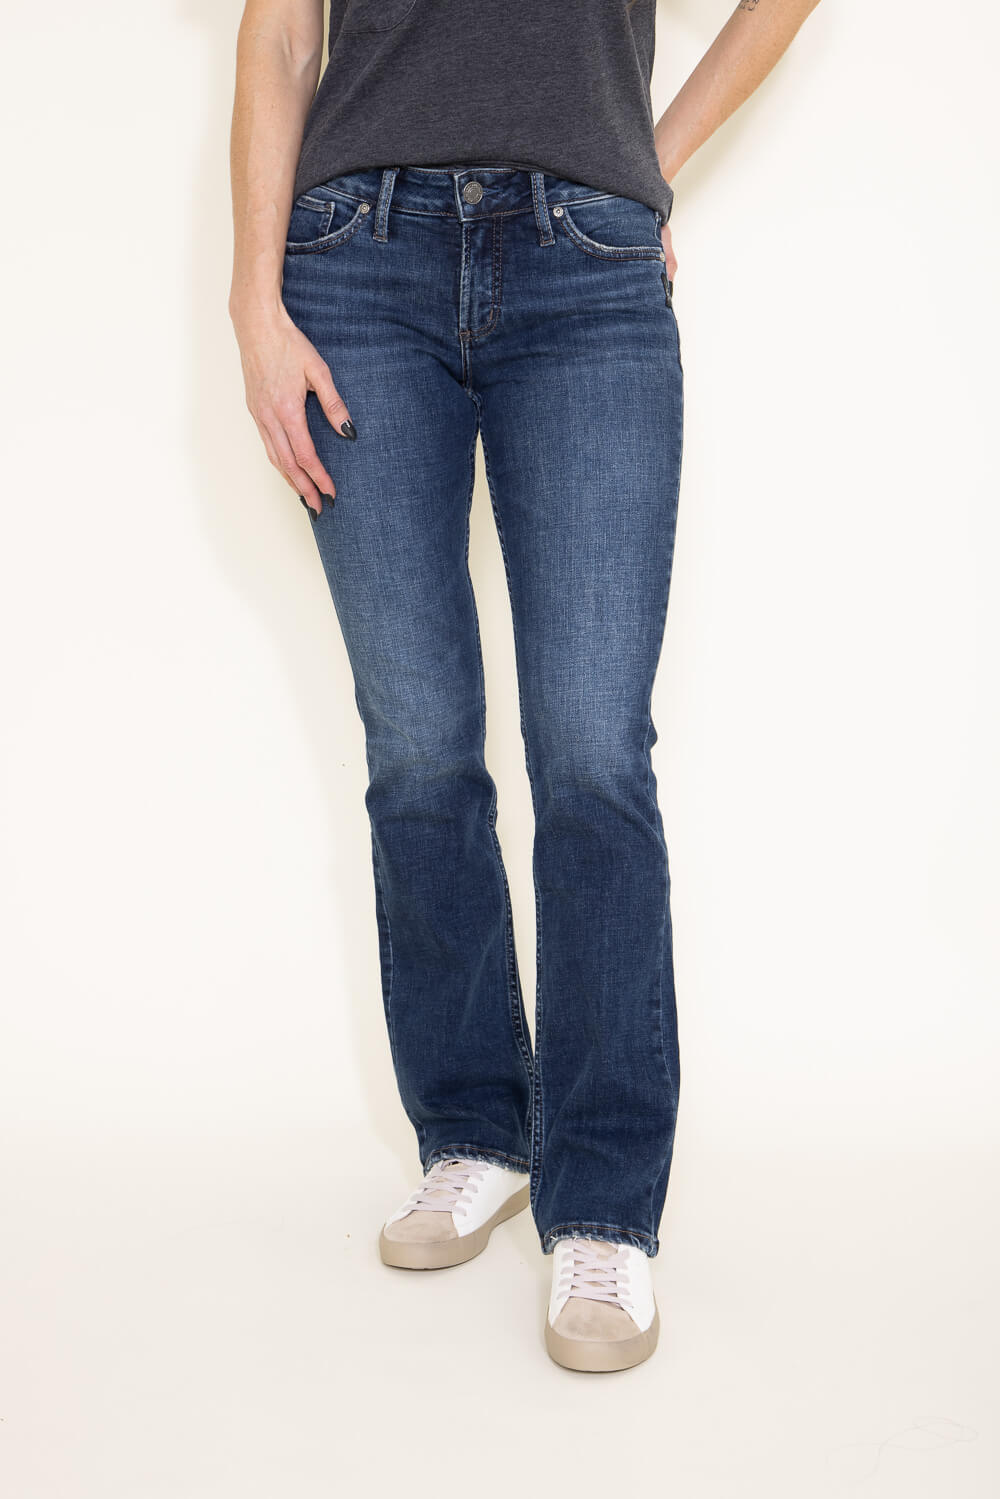 Silver Jeans 31” Suki Mid Rise Slim Bootcut Jeans For Women